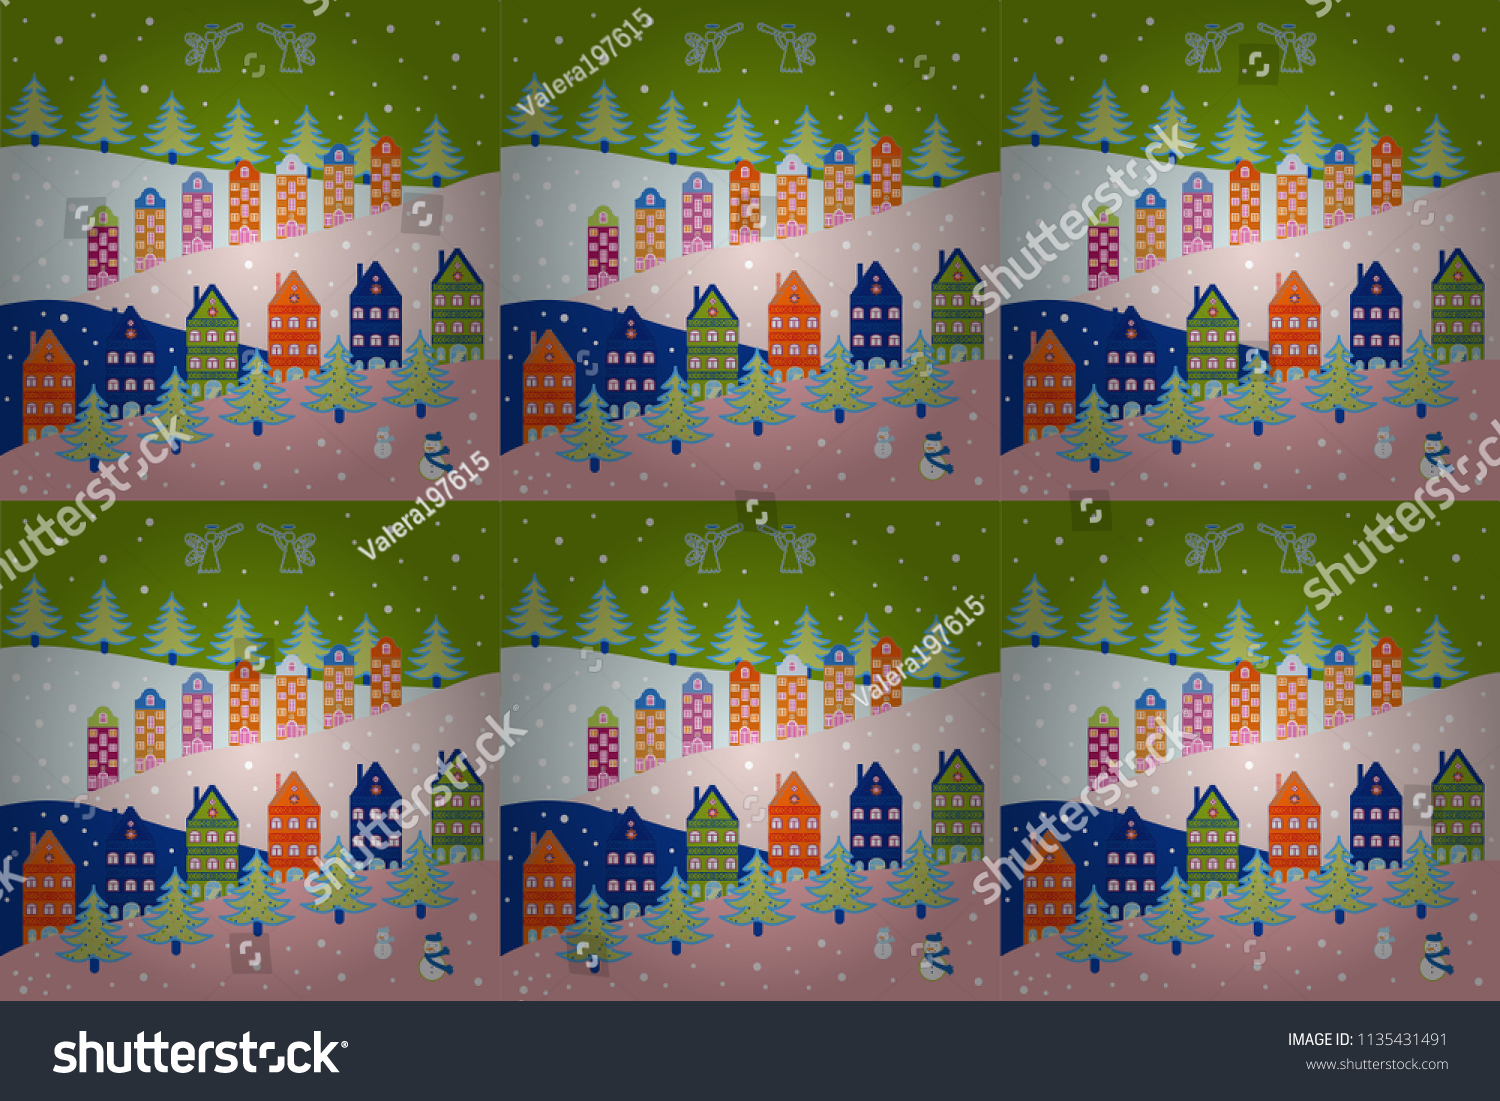 Cute houses and trees on blue, pink, green, neutral and gray colors background. Colorfil landscape for textile, wallpaper, fabric. Raster. Scandinavian style nature illustration. #1135431491